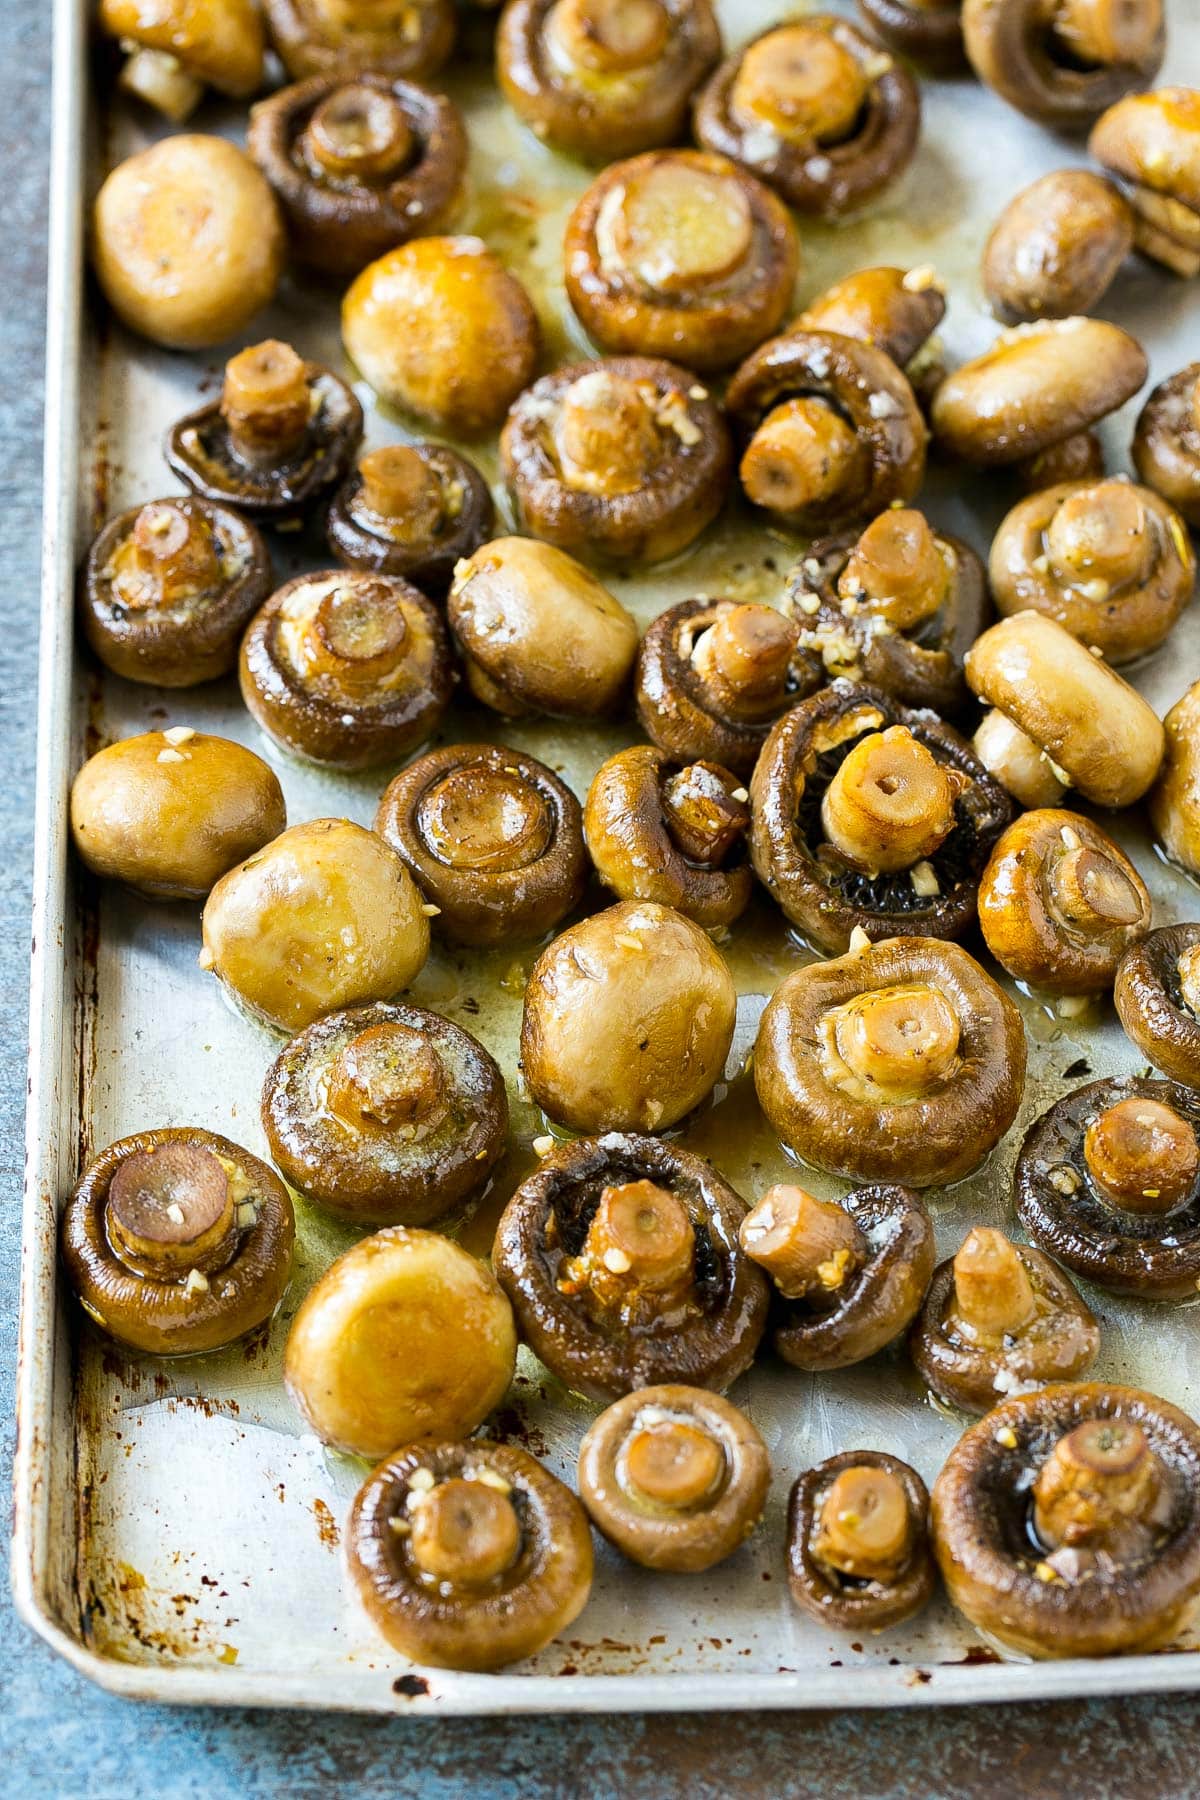 Cooked mushrooms on a sheet pan with garlic butter.